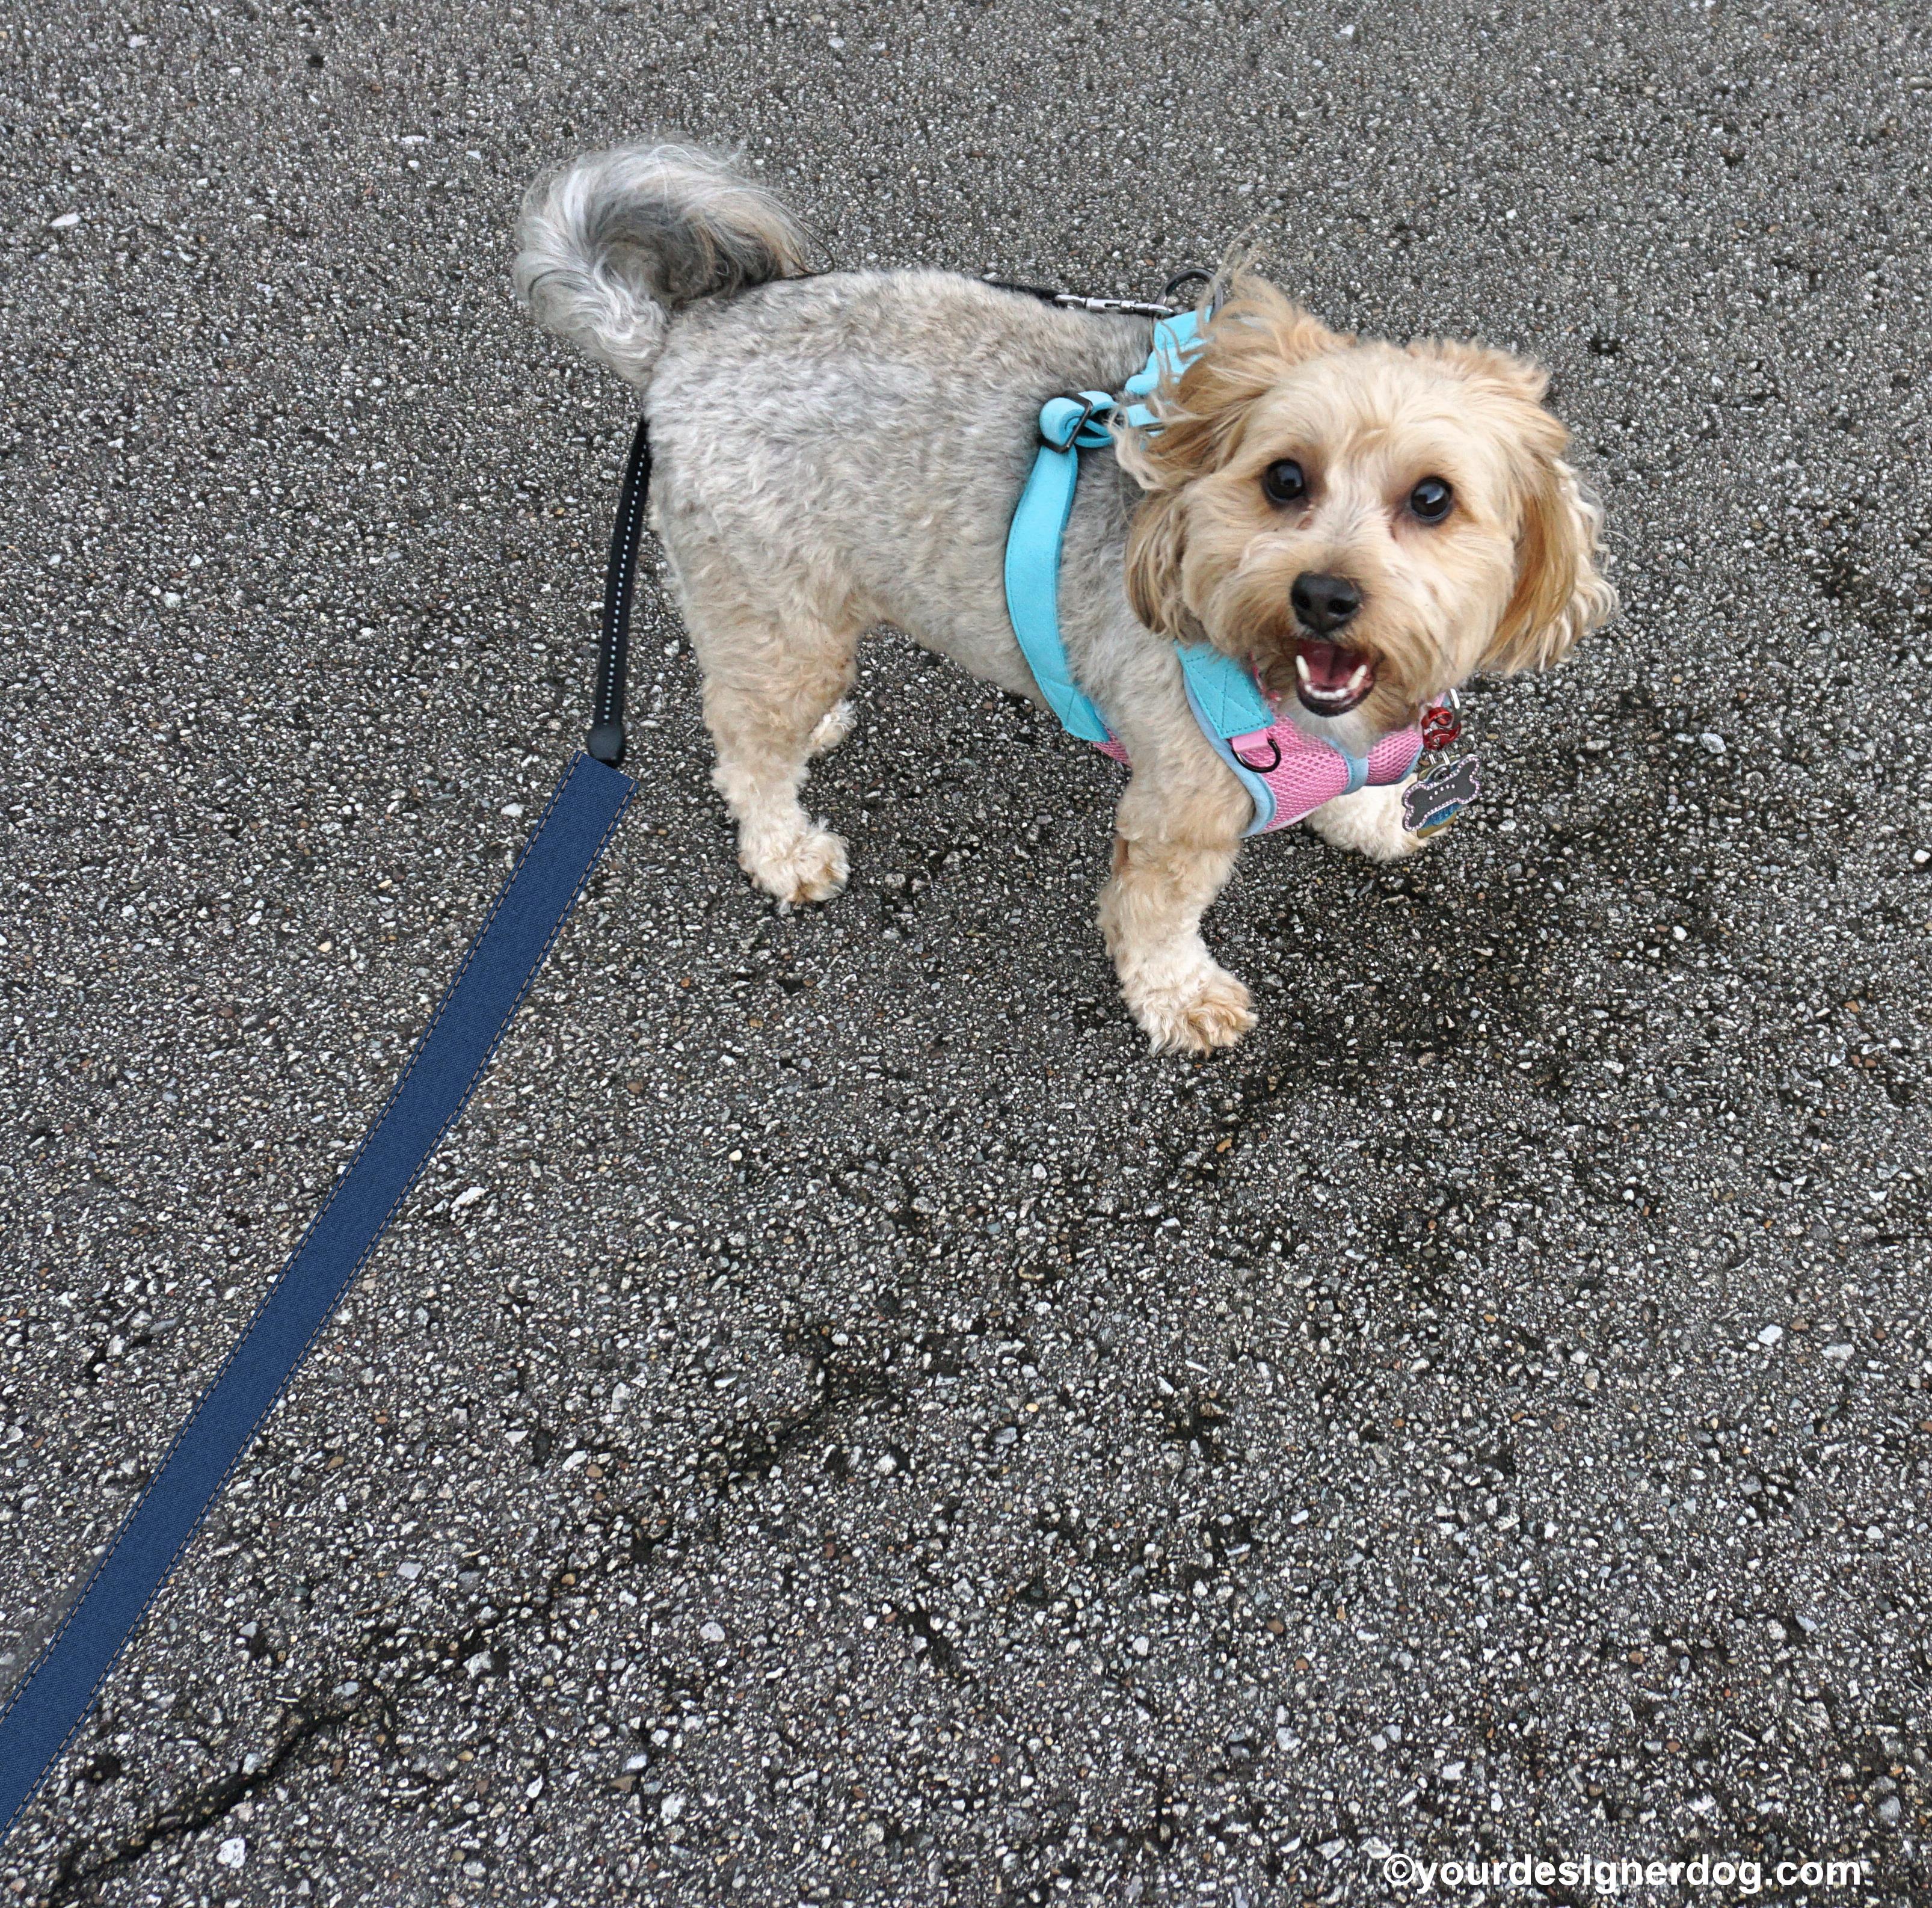 dogs, designer dogs, Yorkipoo, yorkie poo, dog smiling, dog selfie, end of the leash